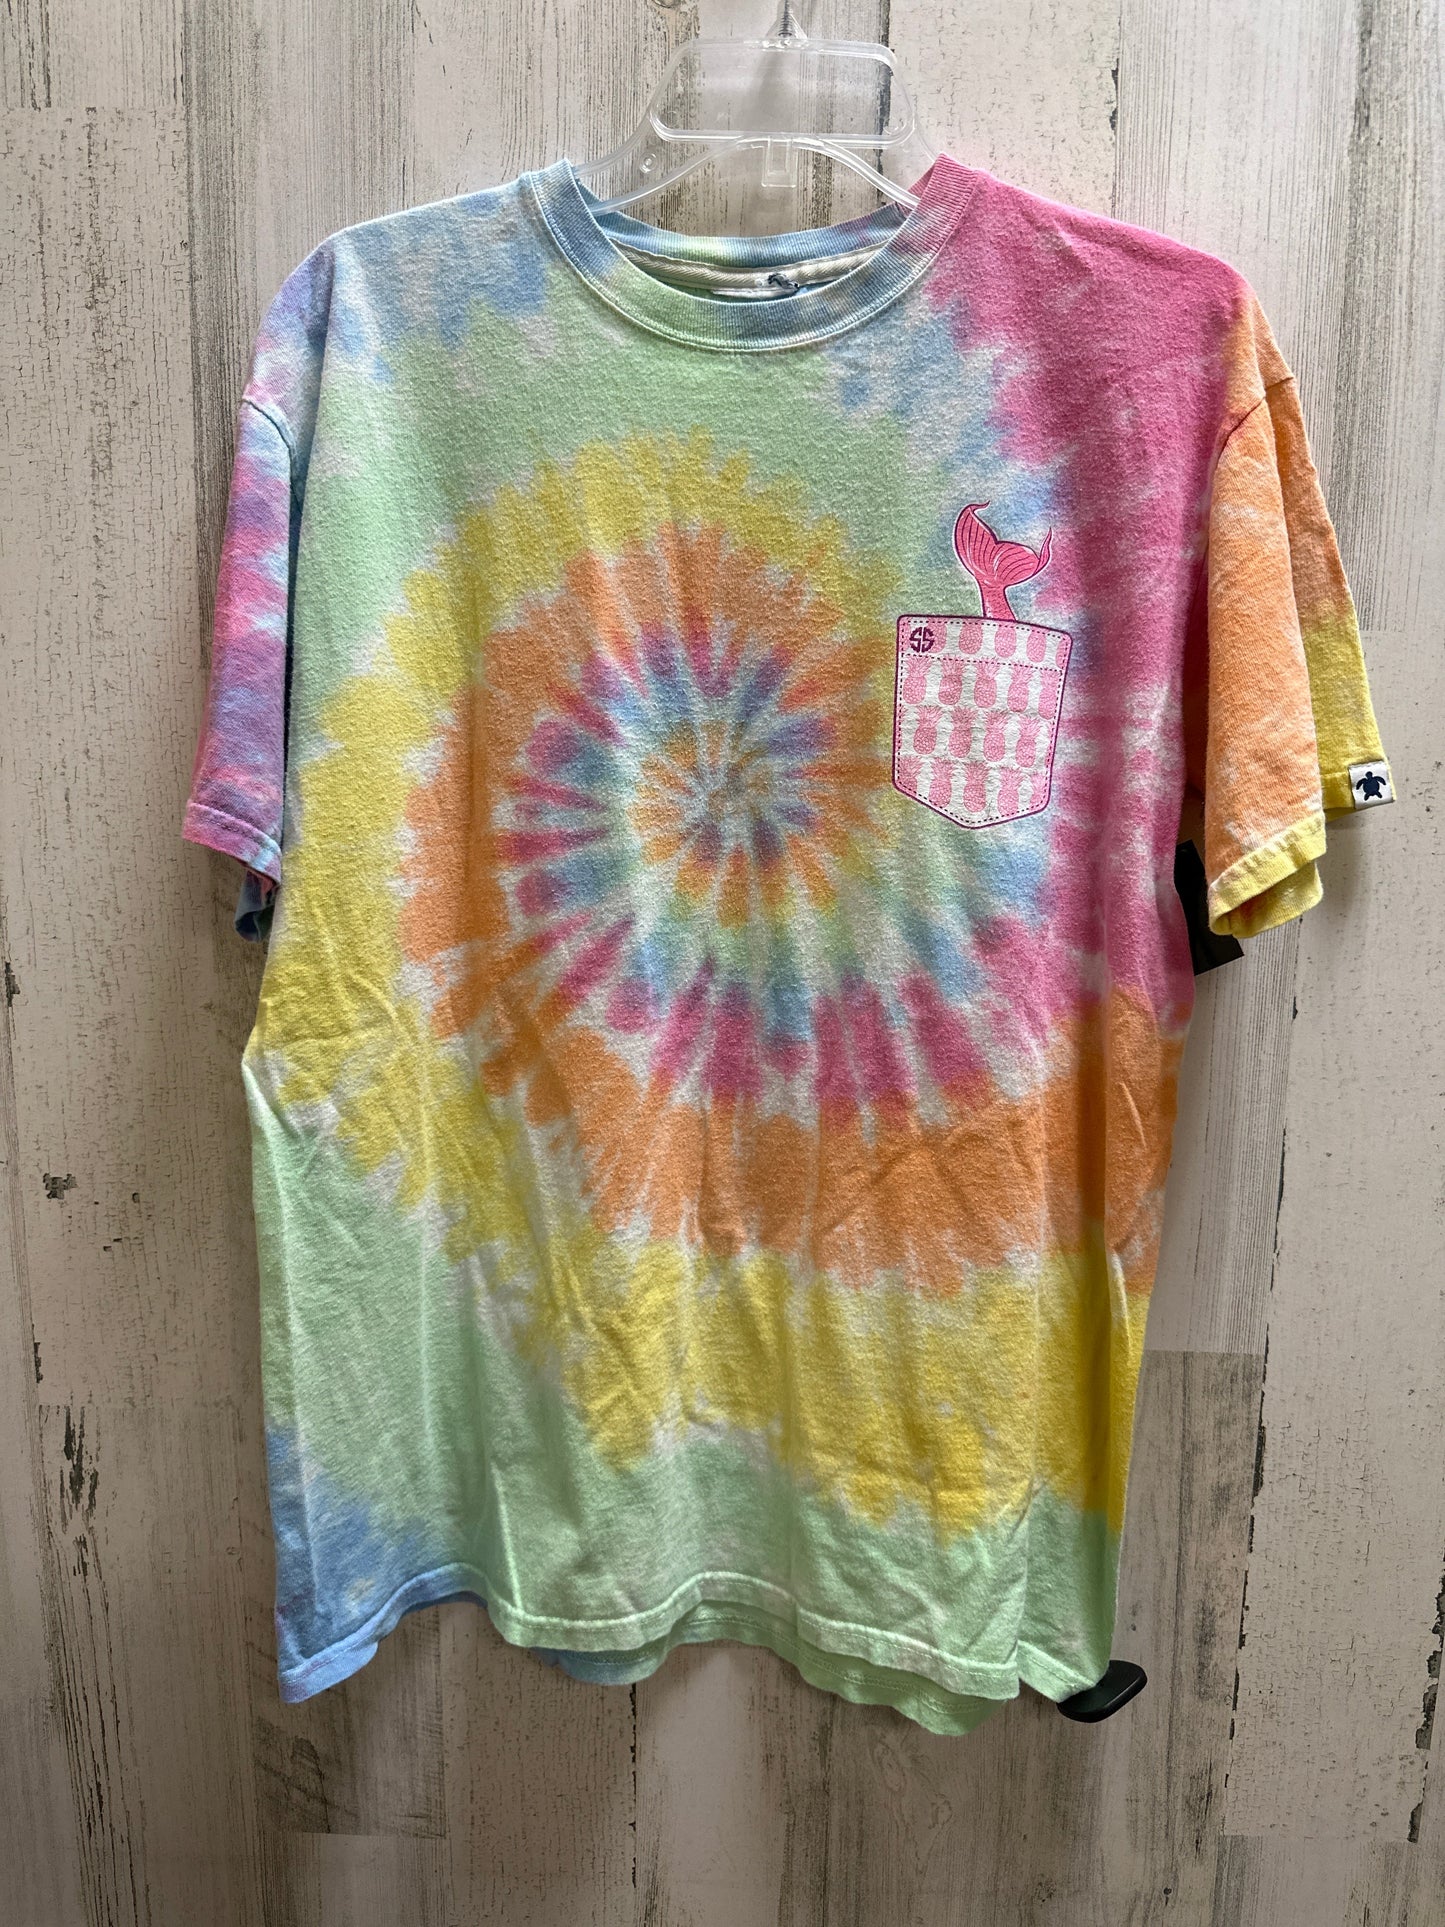 Multi-colored Top Short Sleeve Simply Southern, Size L